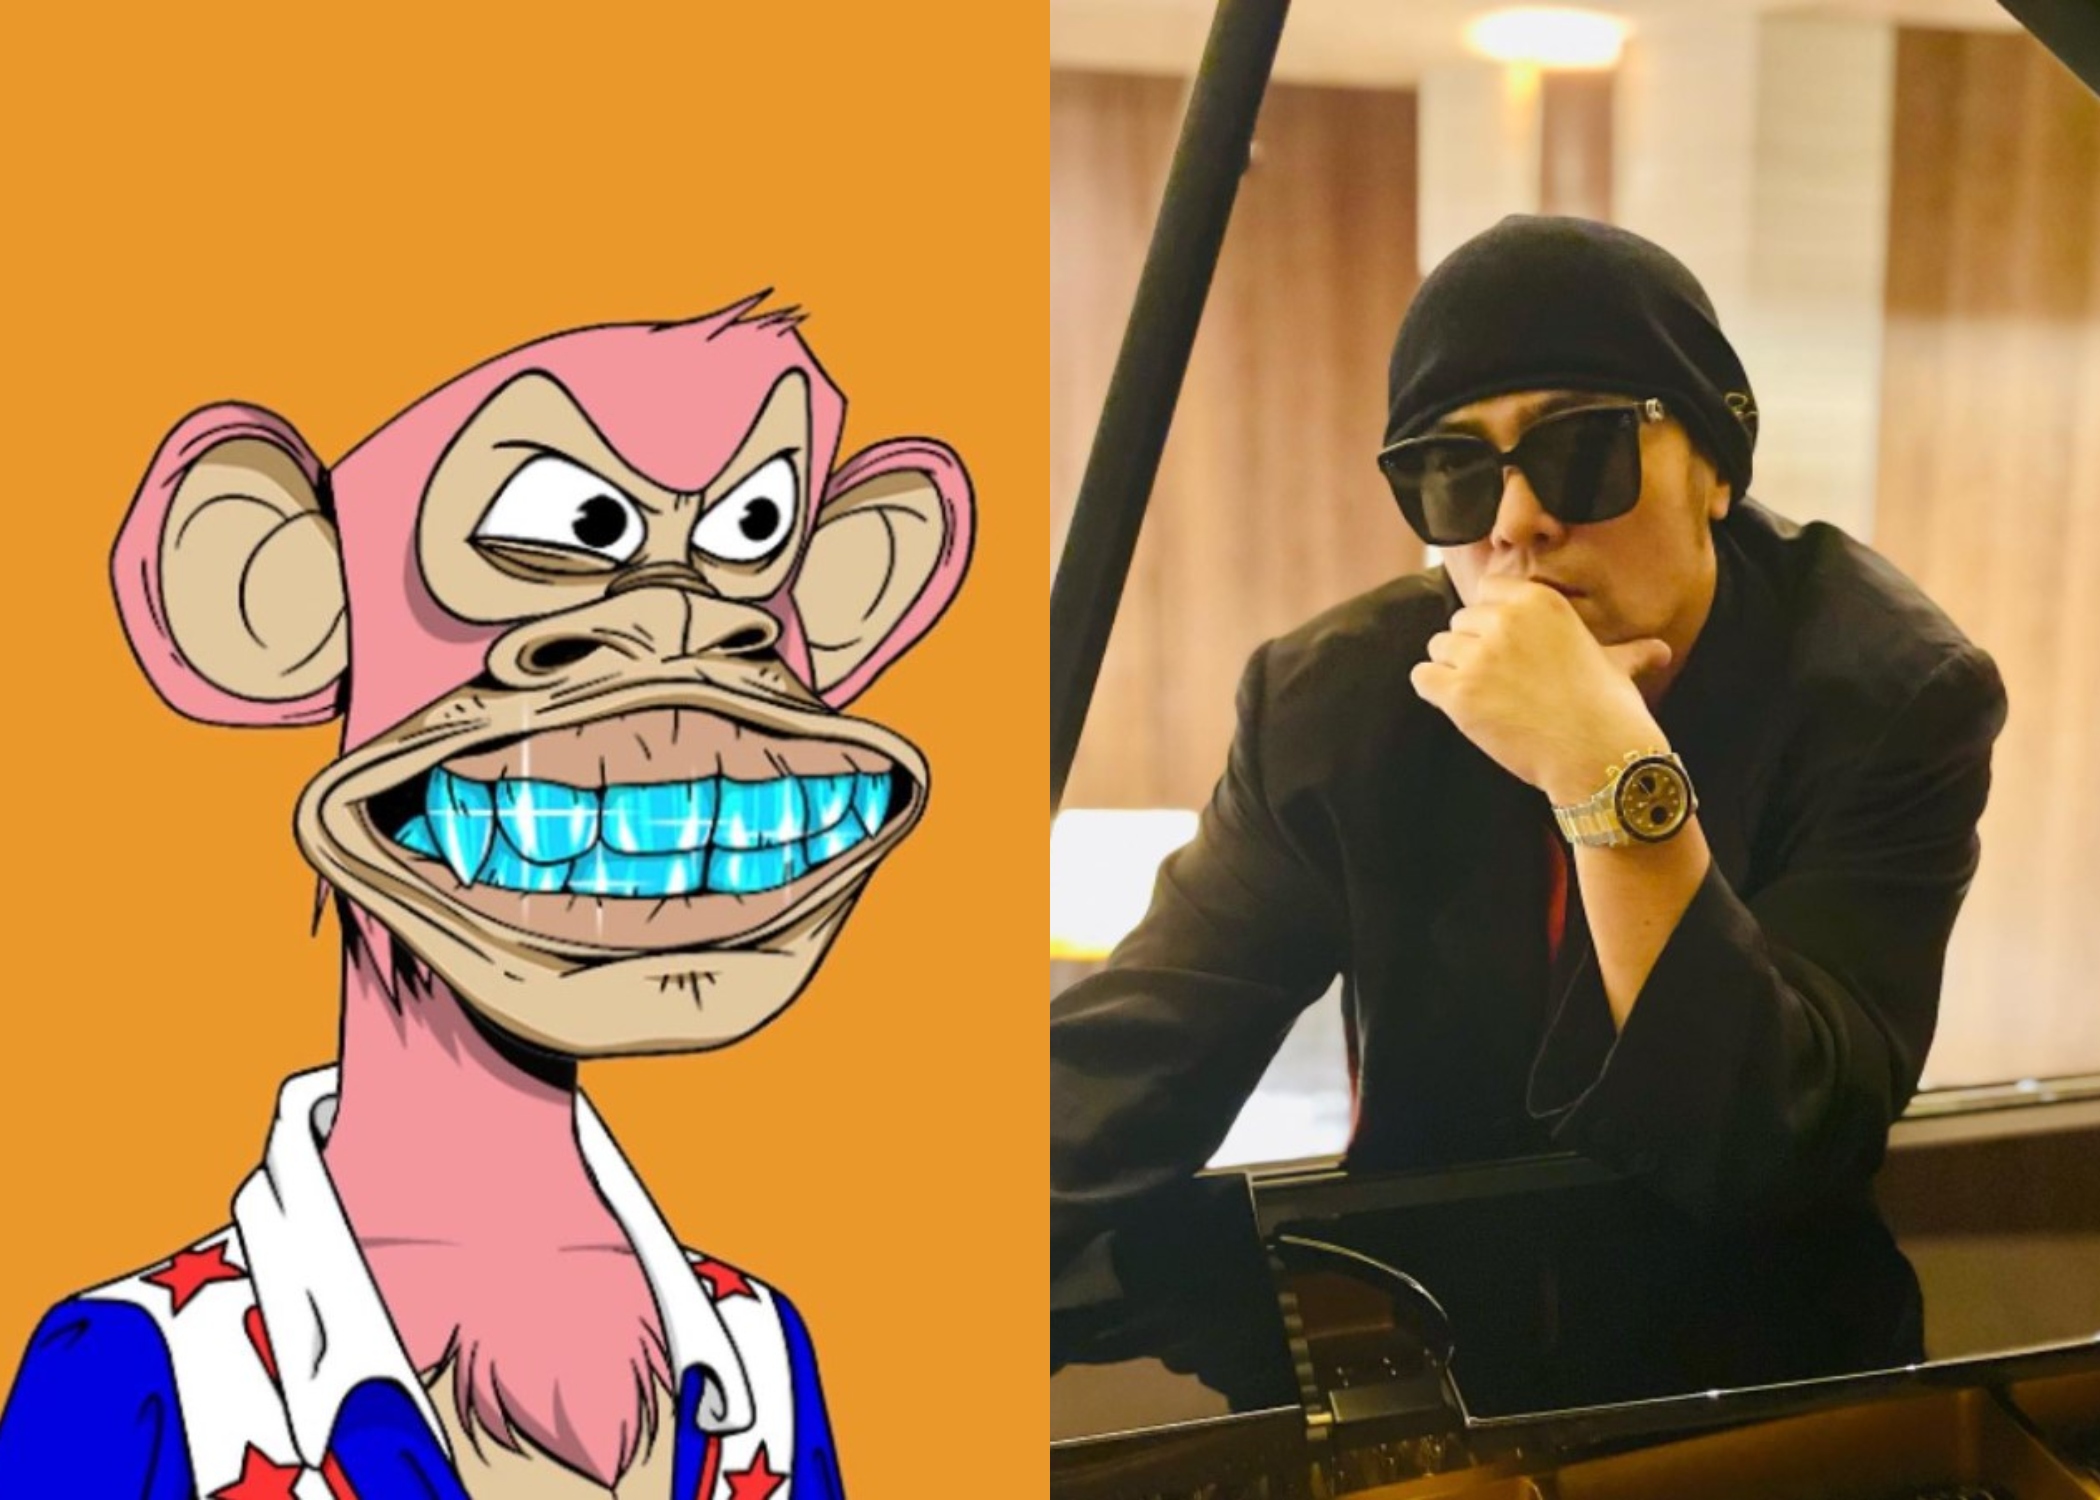 A Scammer Stole Jay Chou’s “Bored Ape” NFT, and It Fetched Over US$500k During Resale